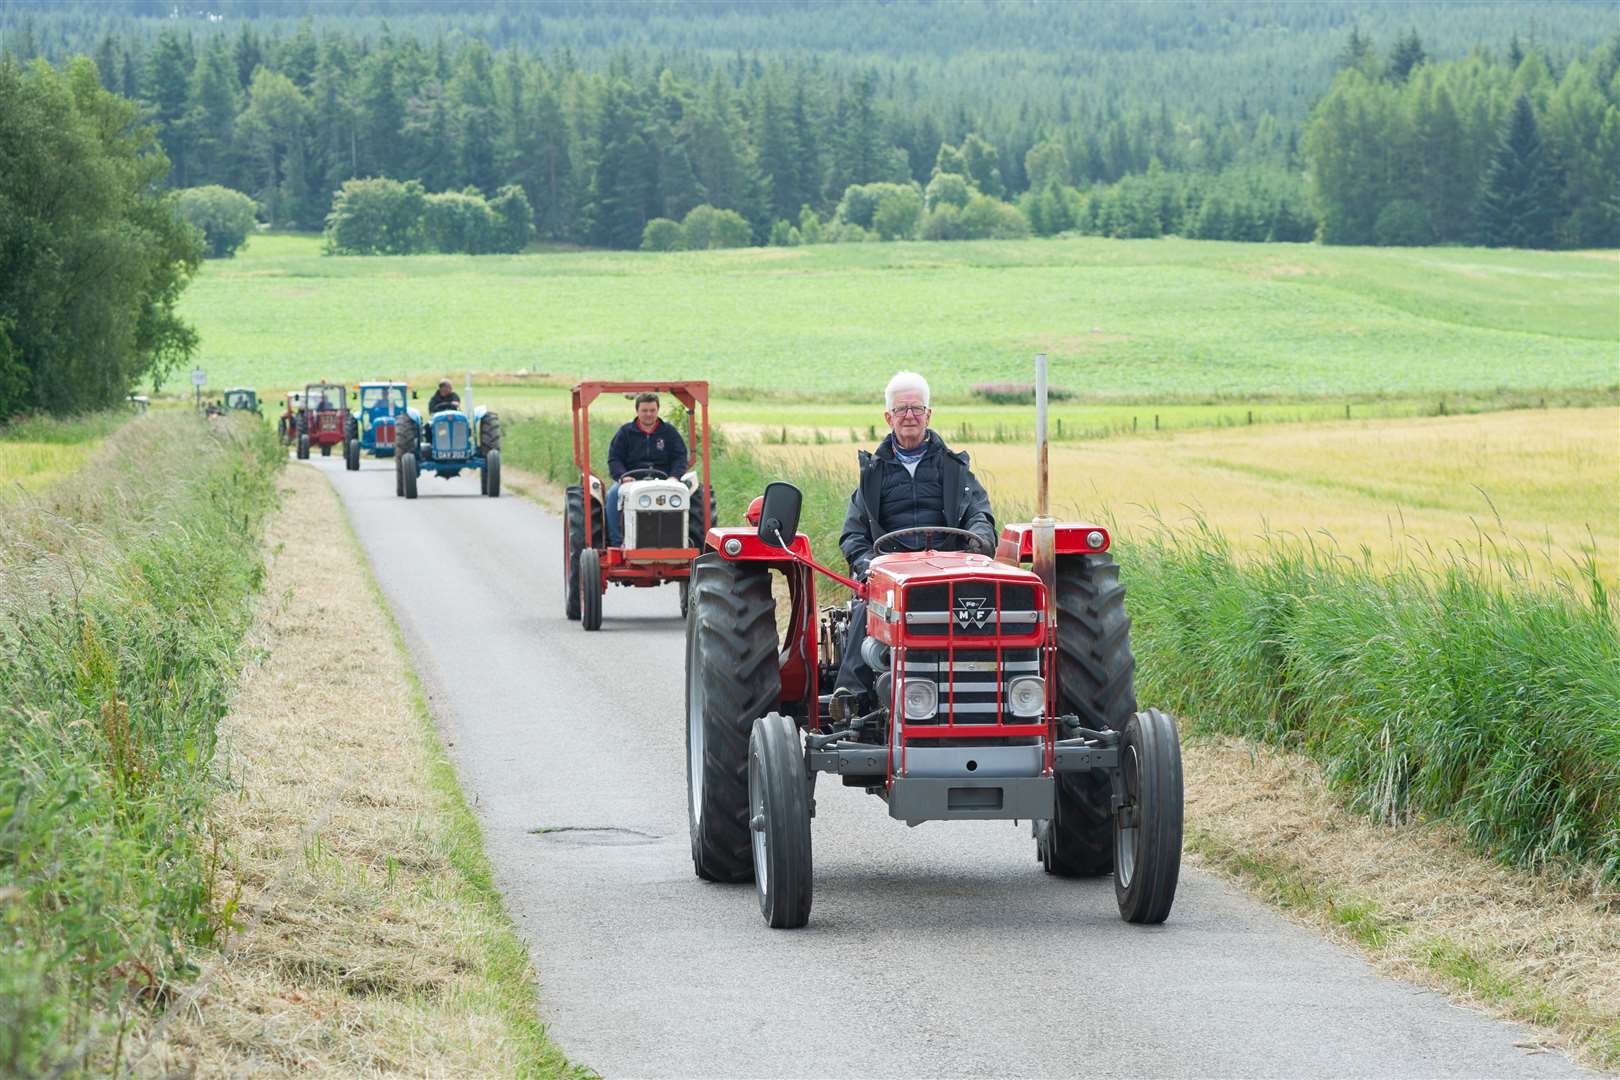 Tractor runs are to be exempted from new regulations.